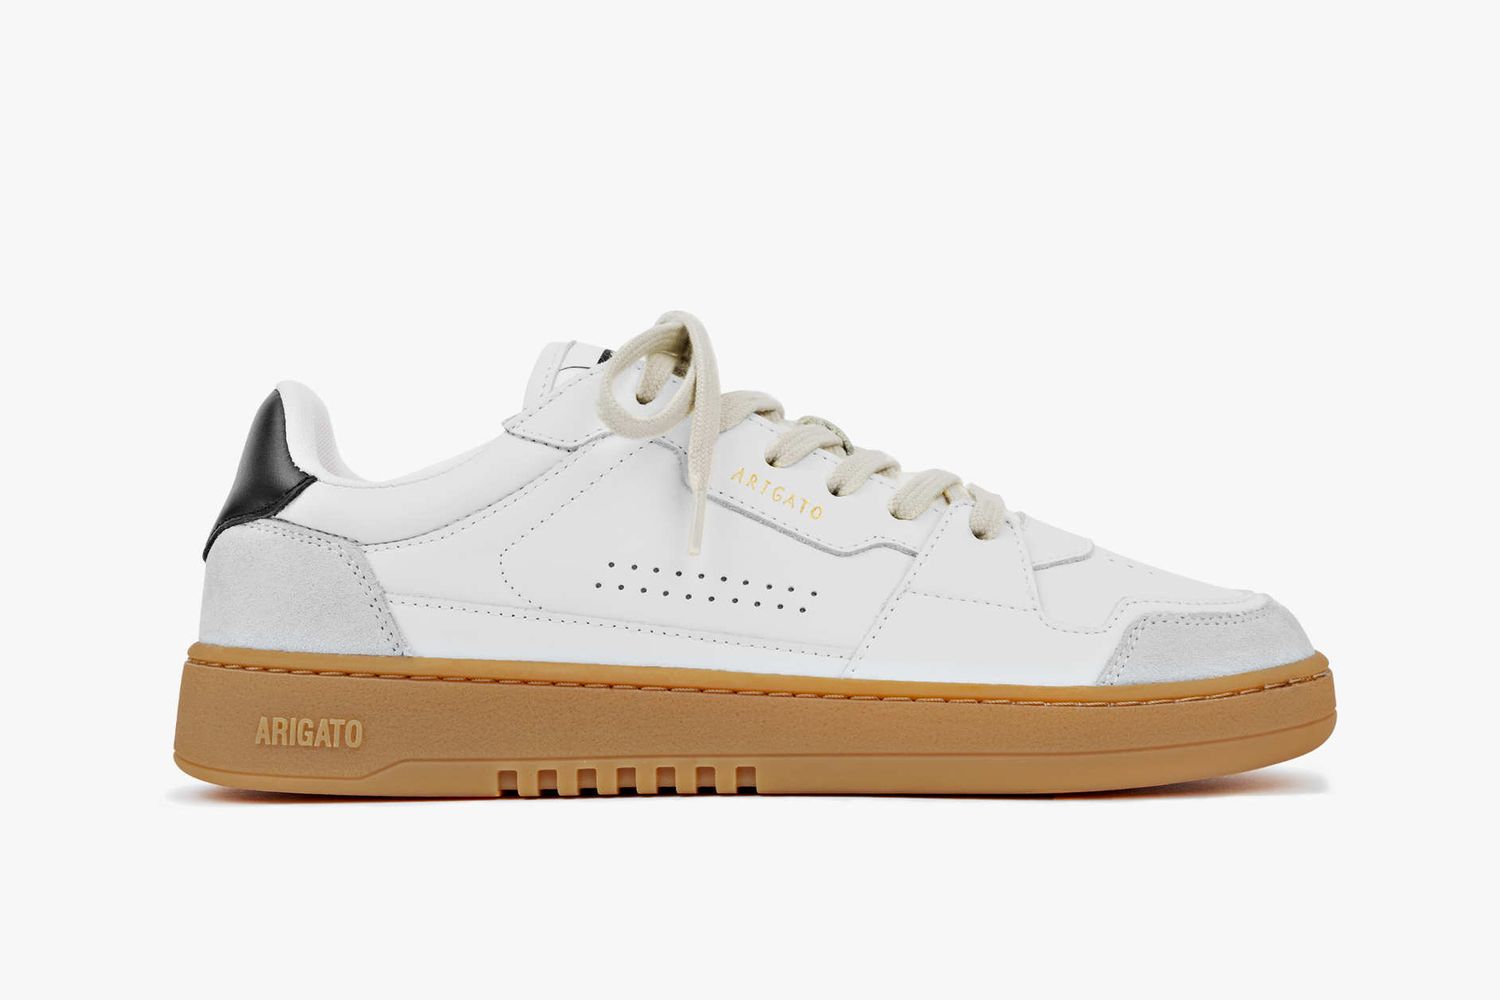 The Best White Kicks With A Gum Sole to Shop Right Now